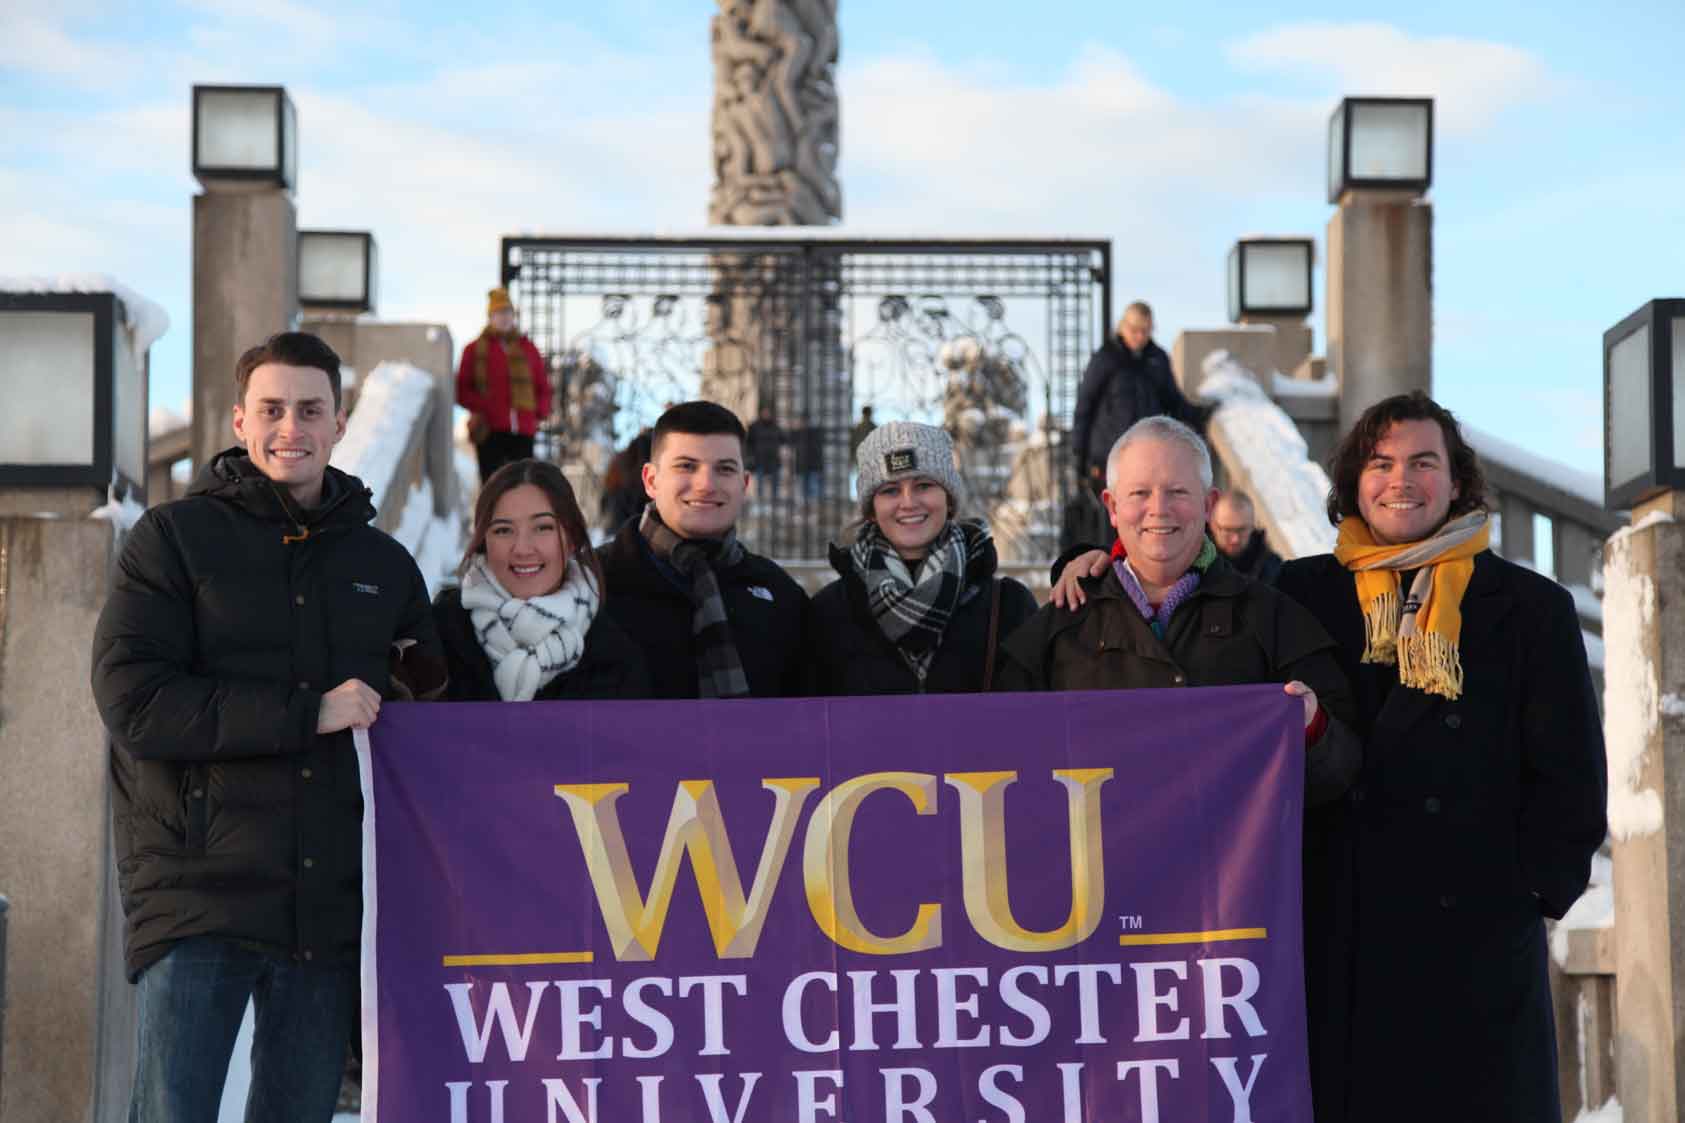 Group posing with WCU flag